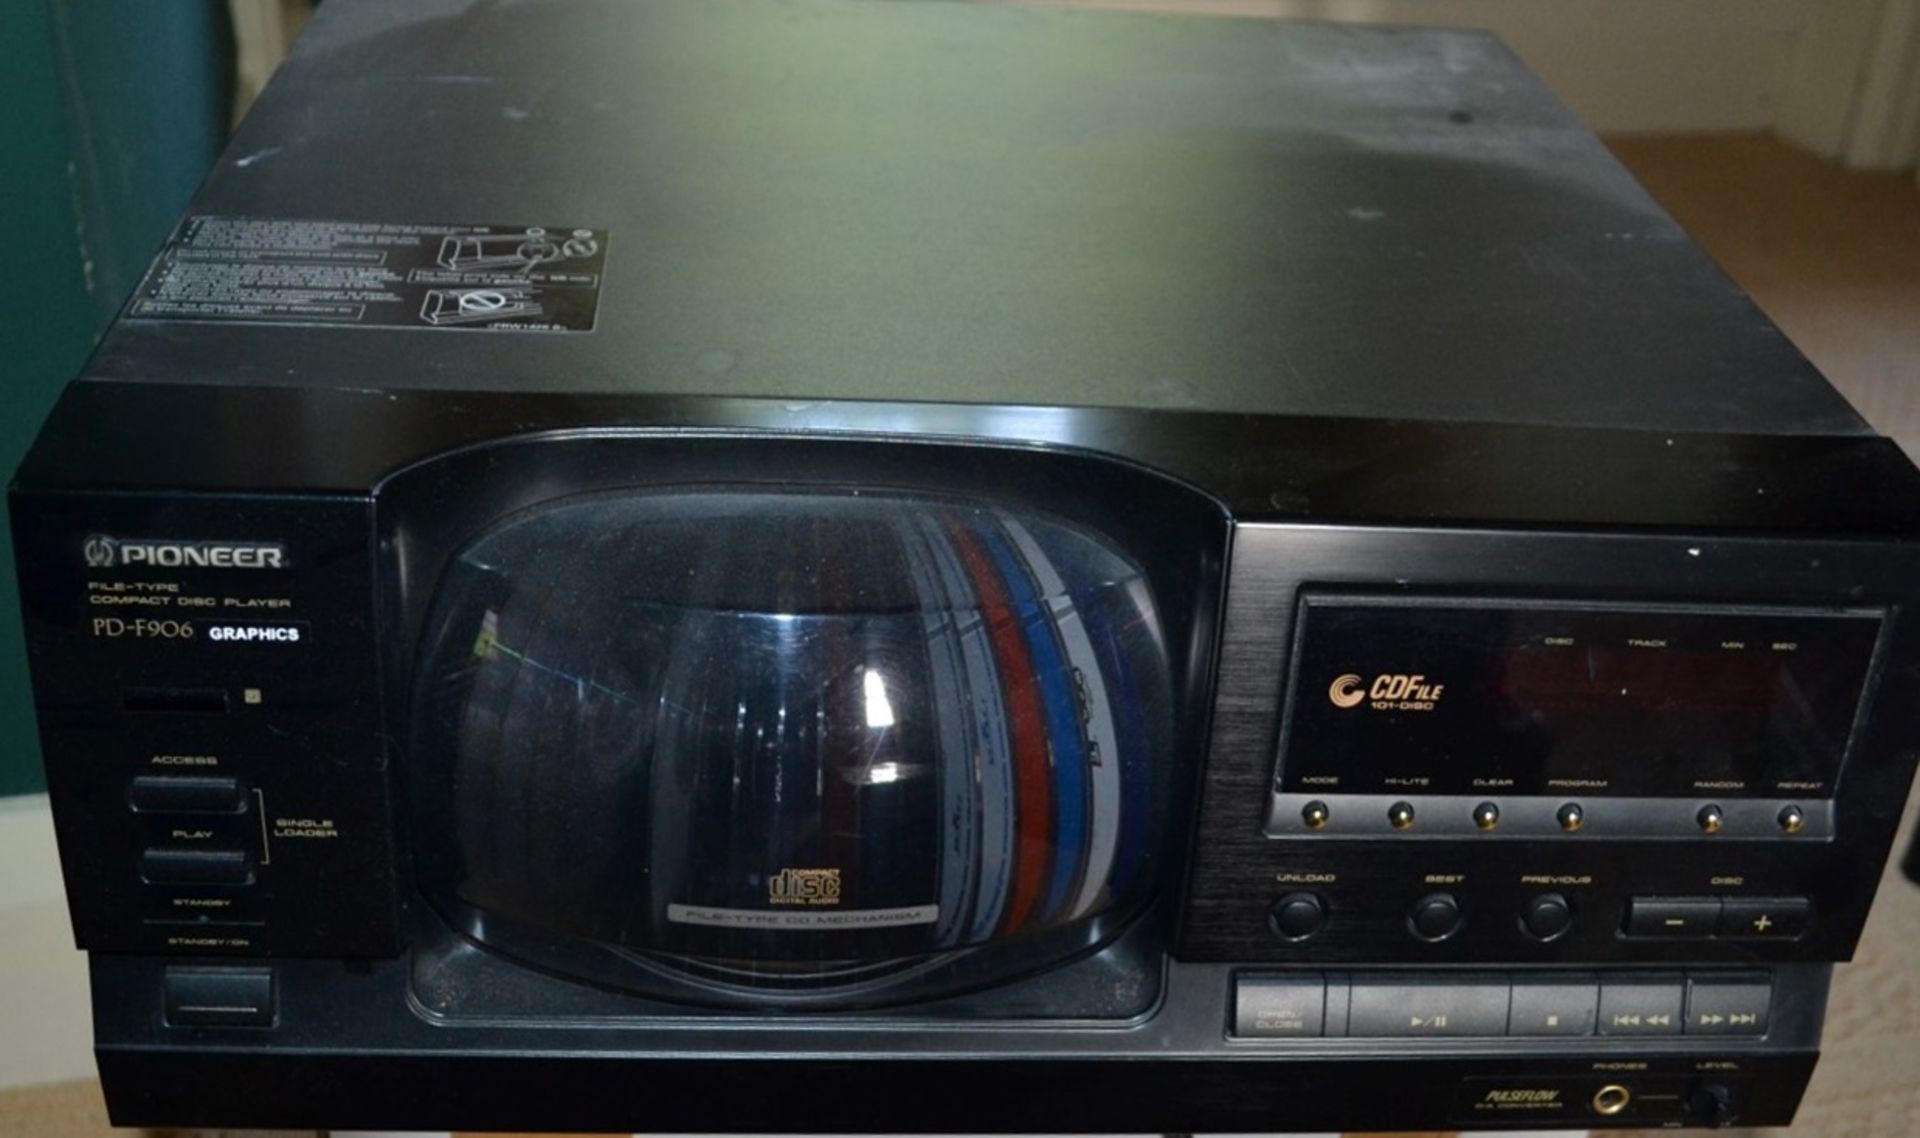 1 x Pioneer PD-F906 101 CD Compact Disc Player Changer - Preowned In Good Condition - Ref: